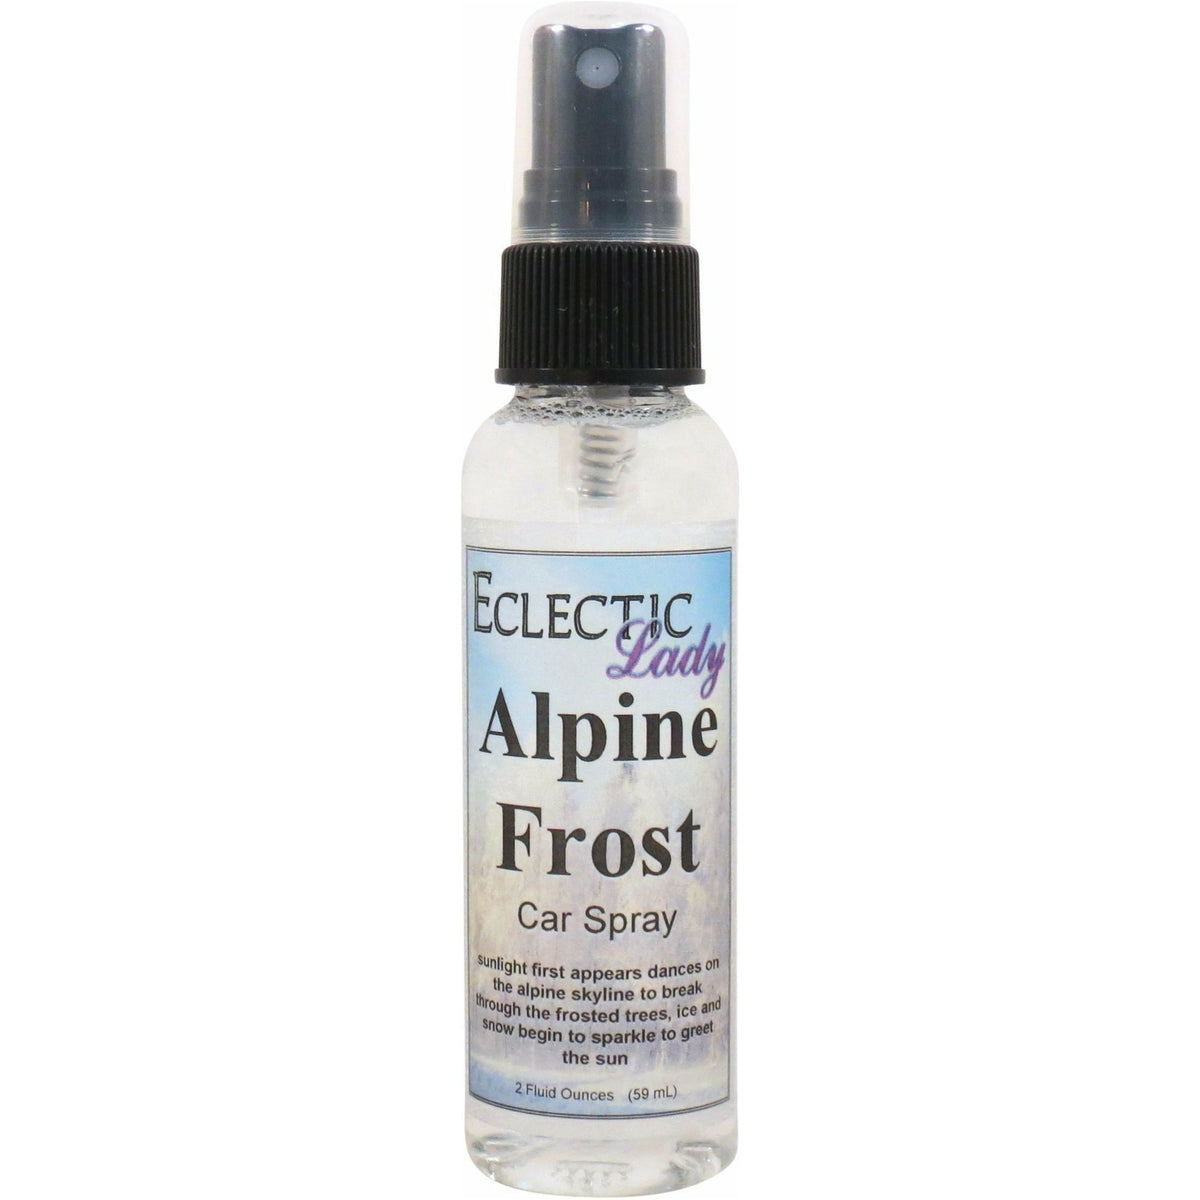 Alpine Frost Car Spray – Eclectic Lady